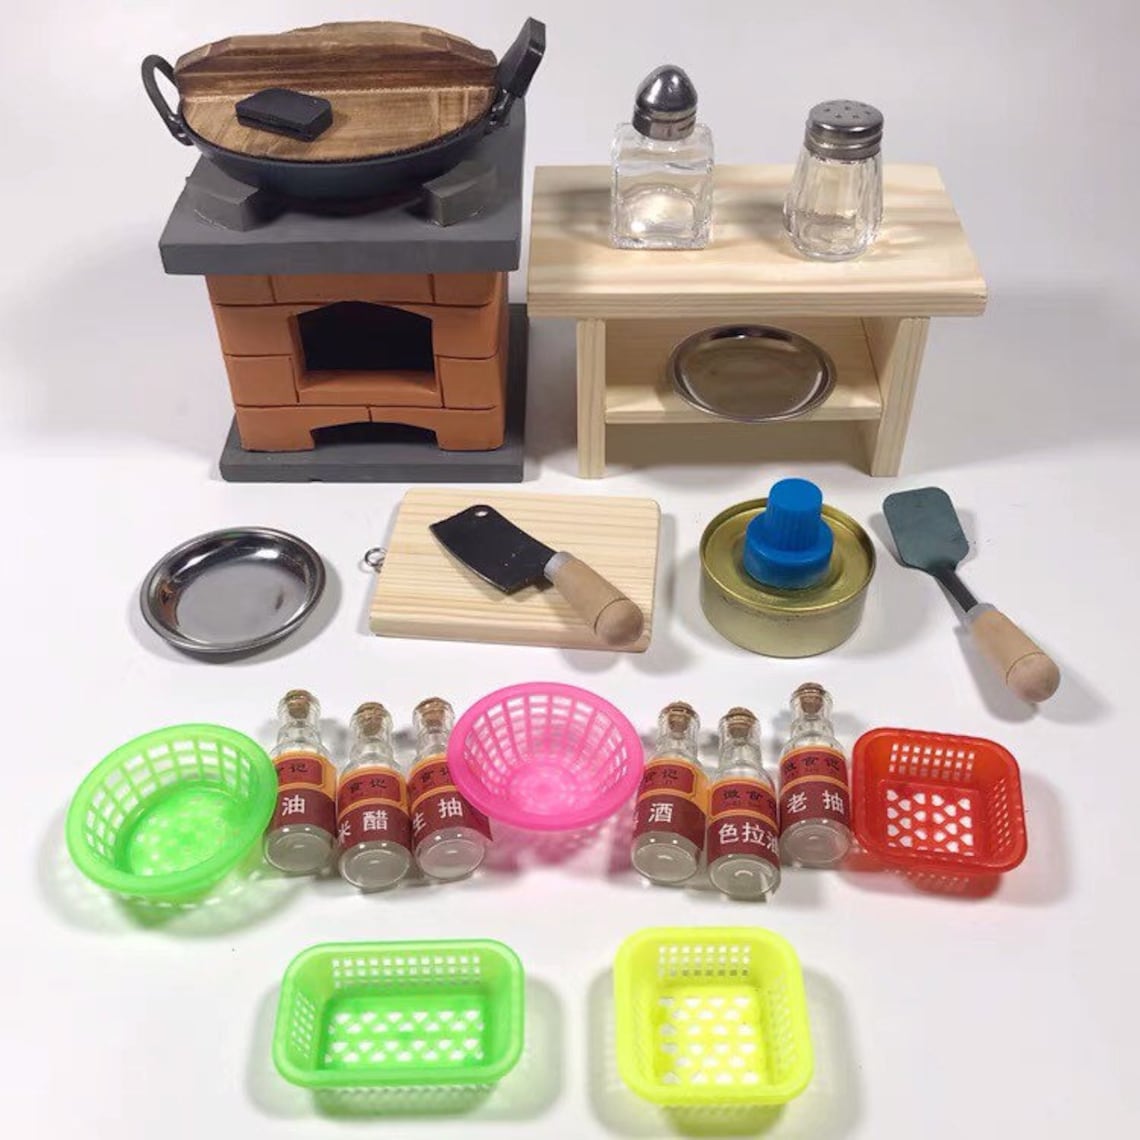 Real Mini Kitchen Cooking Set for Miniature Food Cooking - Etsy